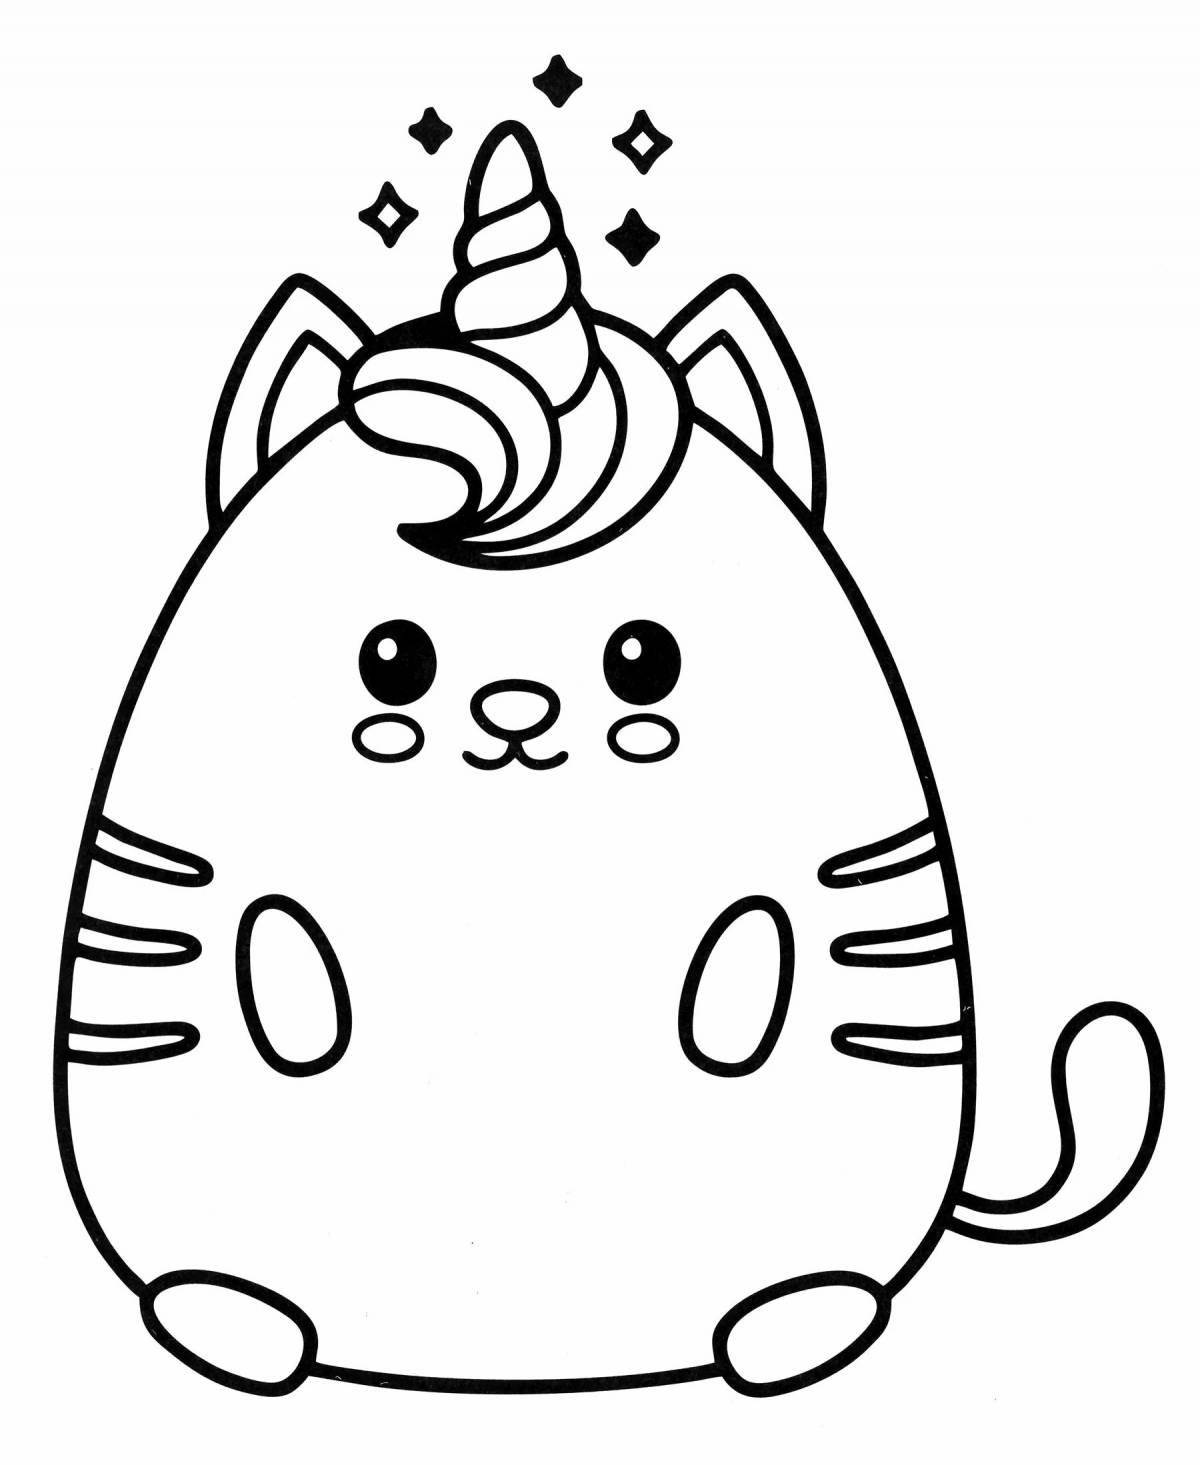 Amazing unicorn cat coloring book for kids